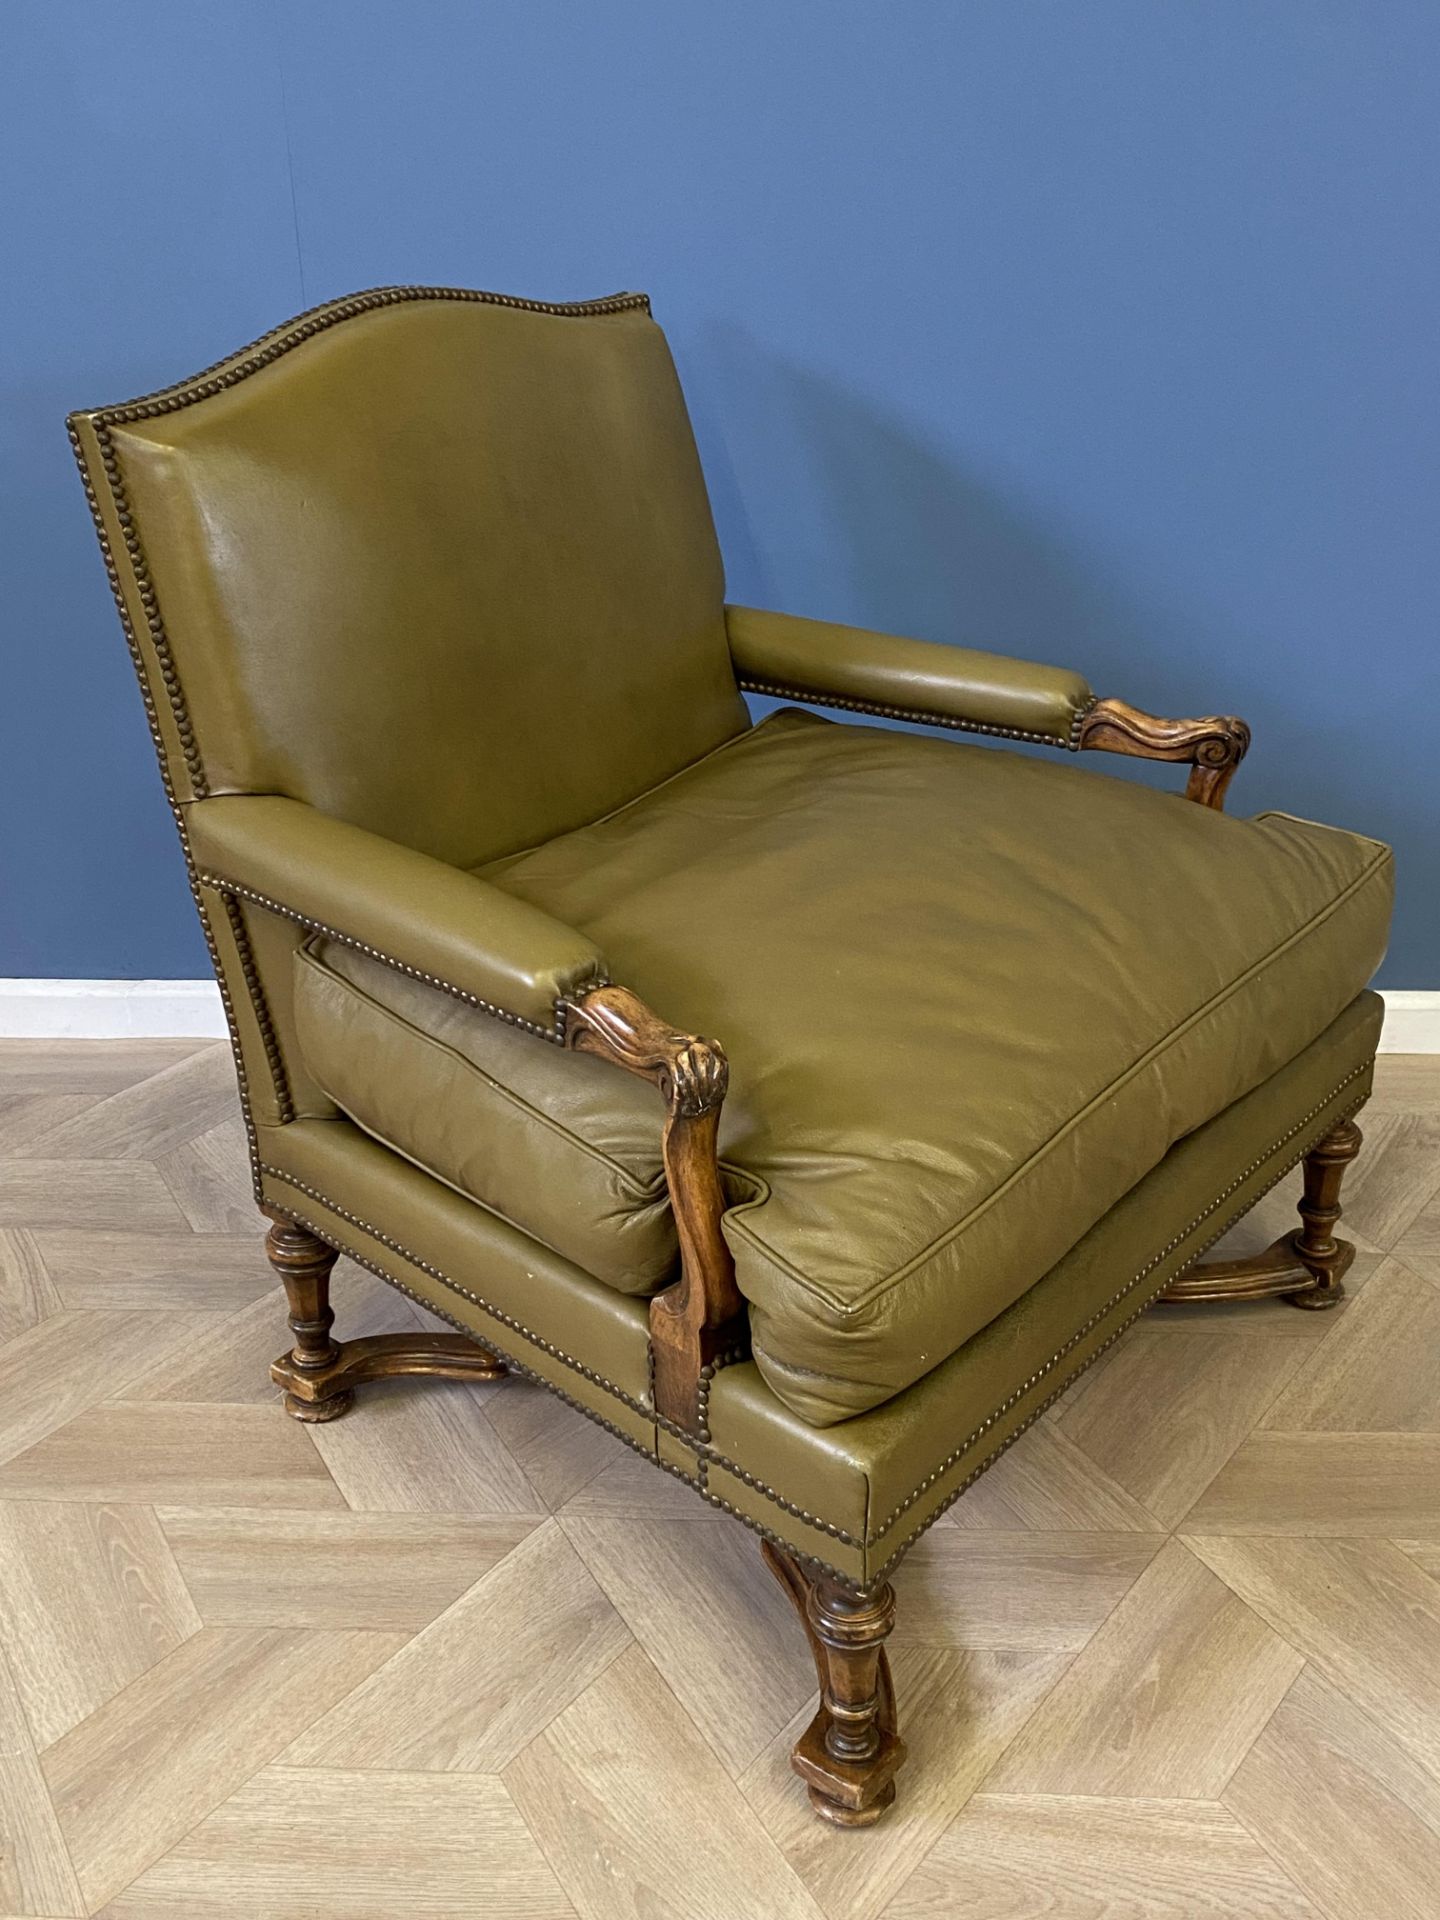 Pair of green leather armchairs - Image 7 of 12